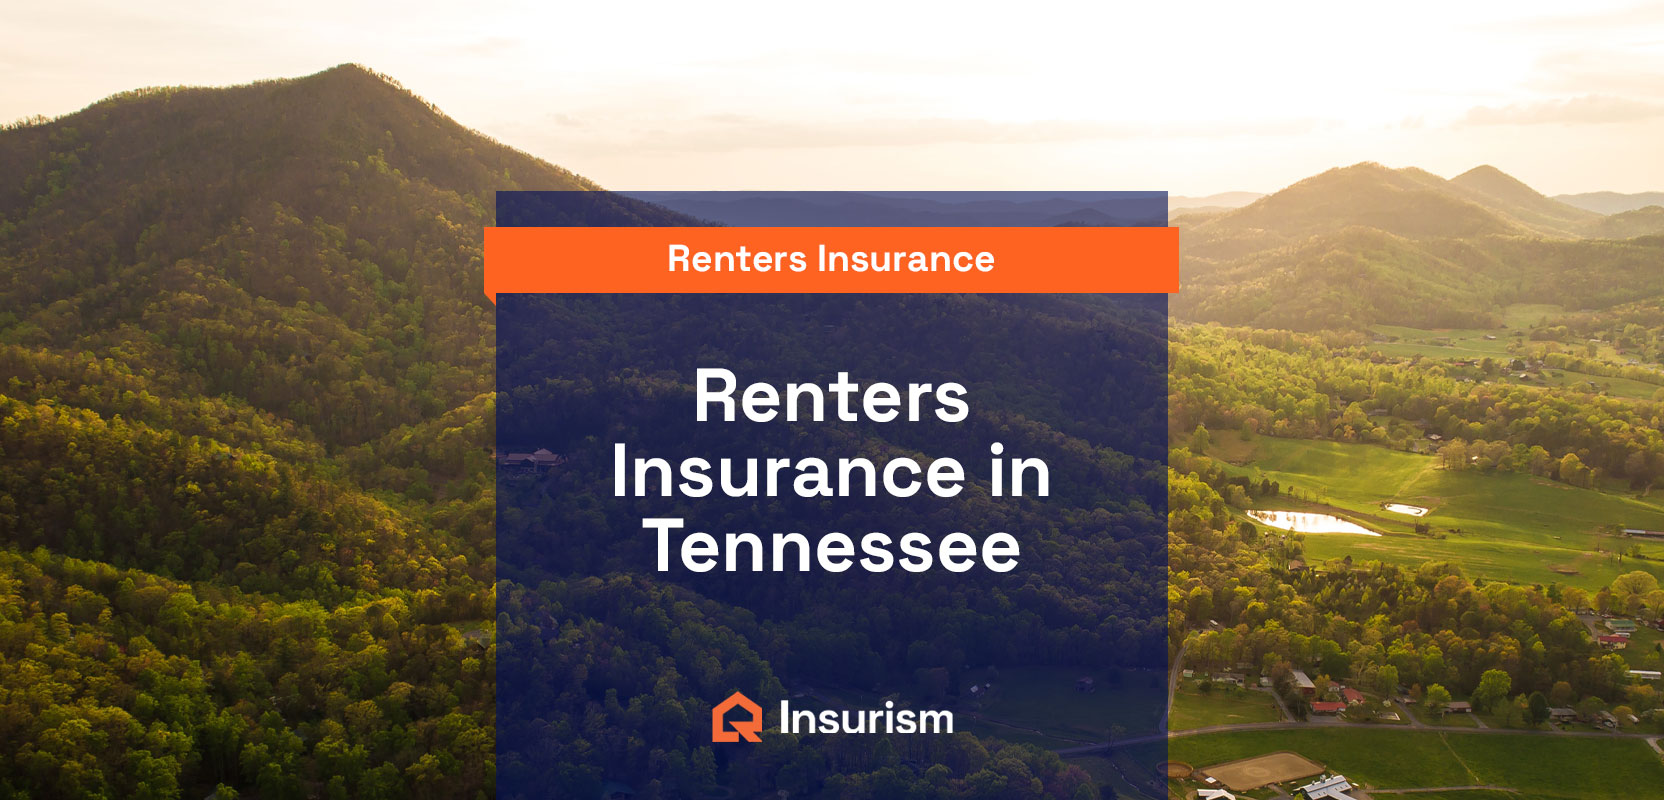 Renters insurance in Tennessee